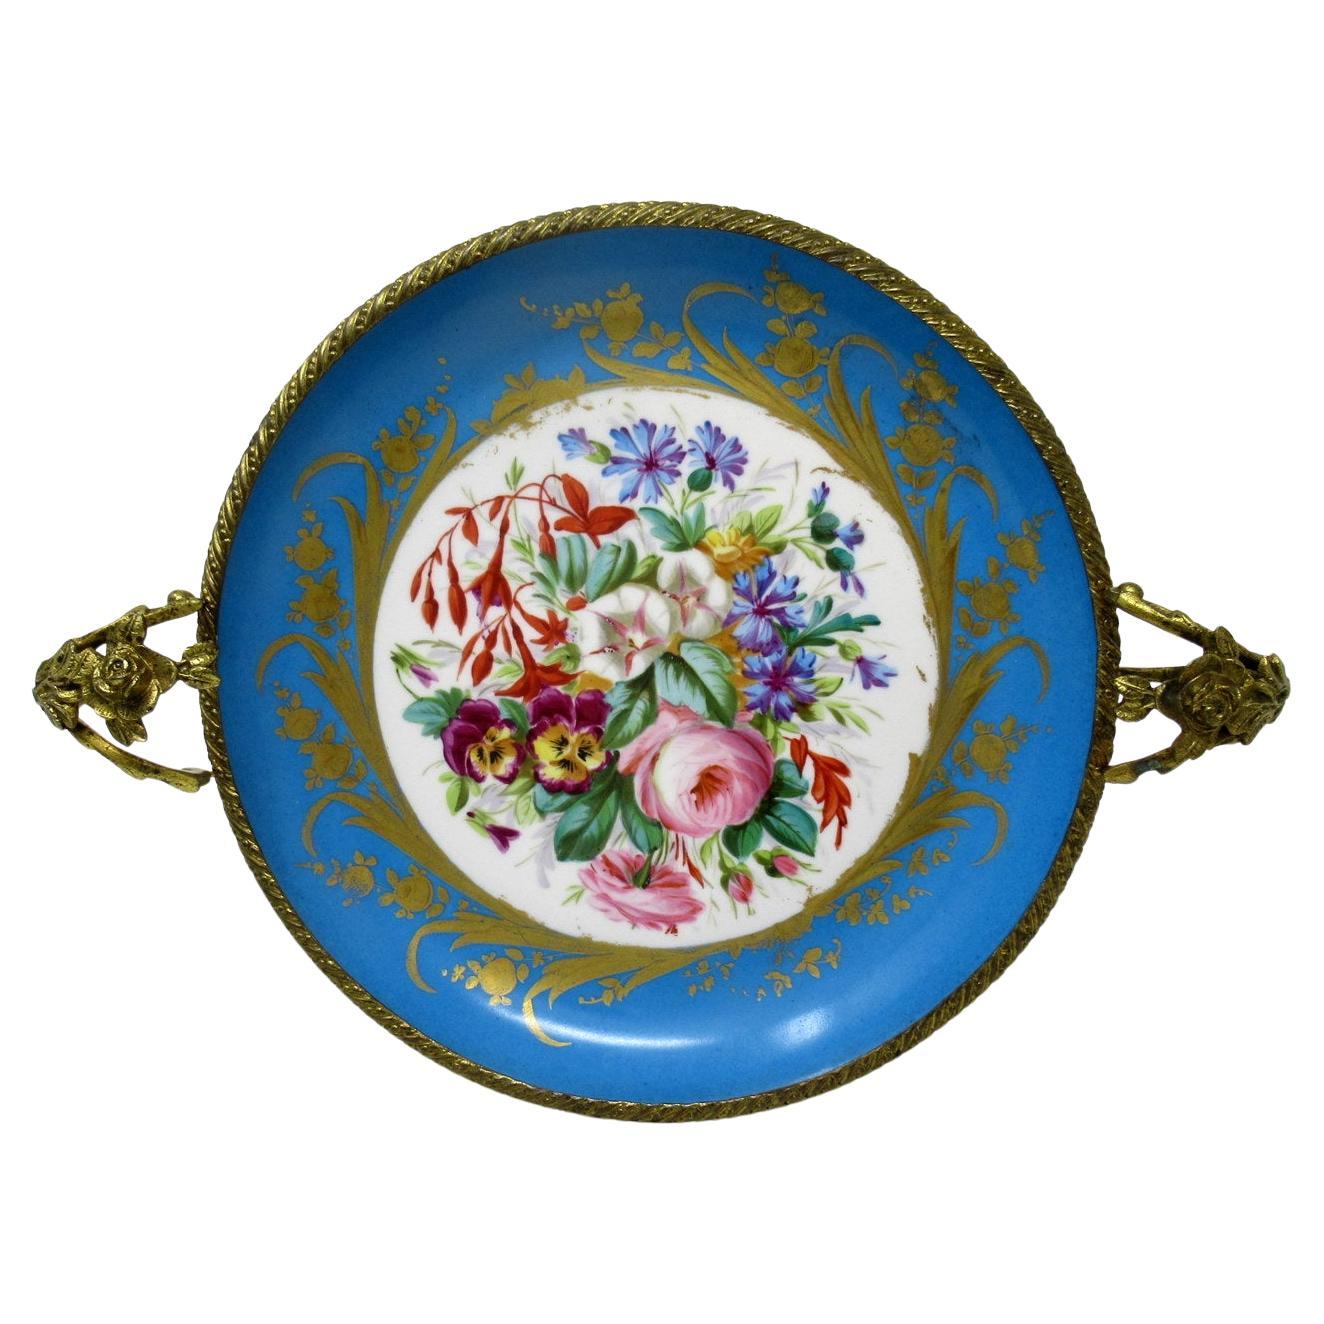 Antique French Sevres Ormolu Gilt Bronze Dore Porcelain Tazza Cabinet Plate Dish For Sale